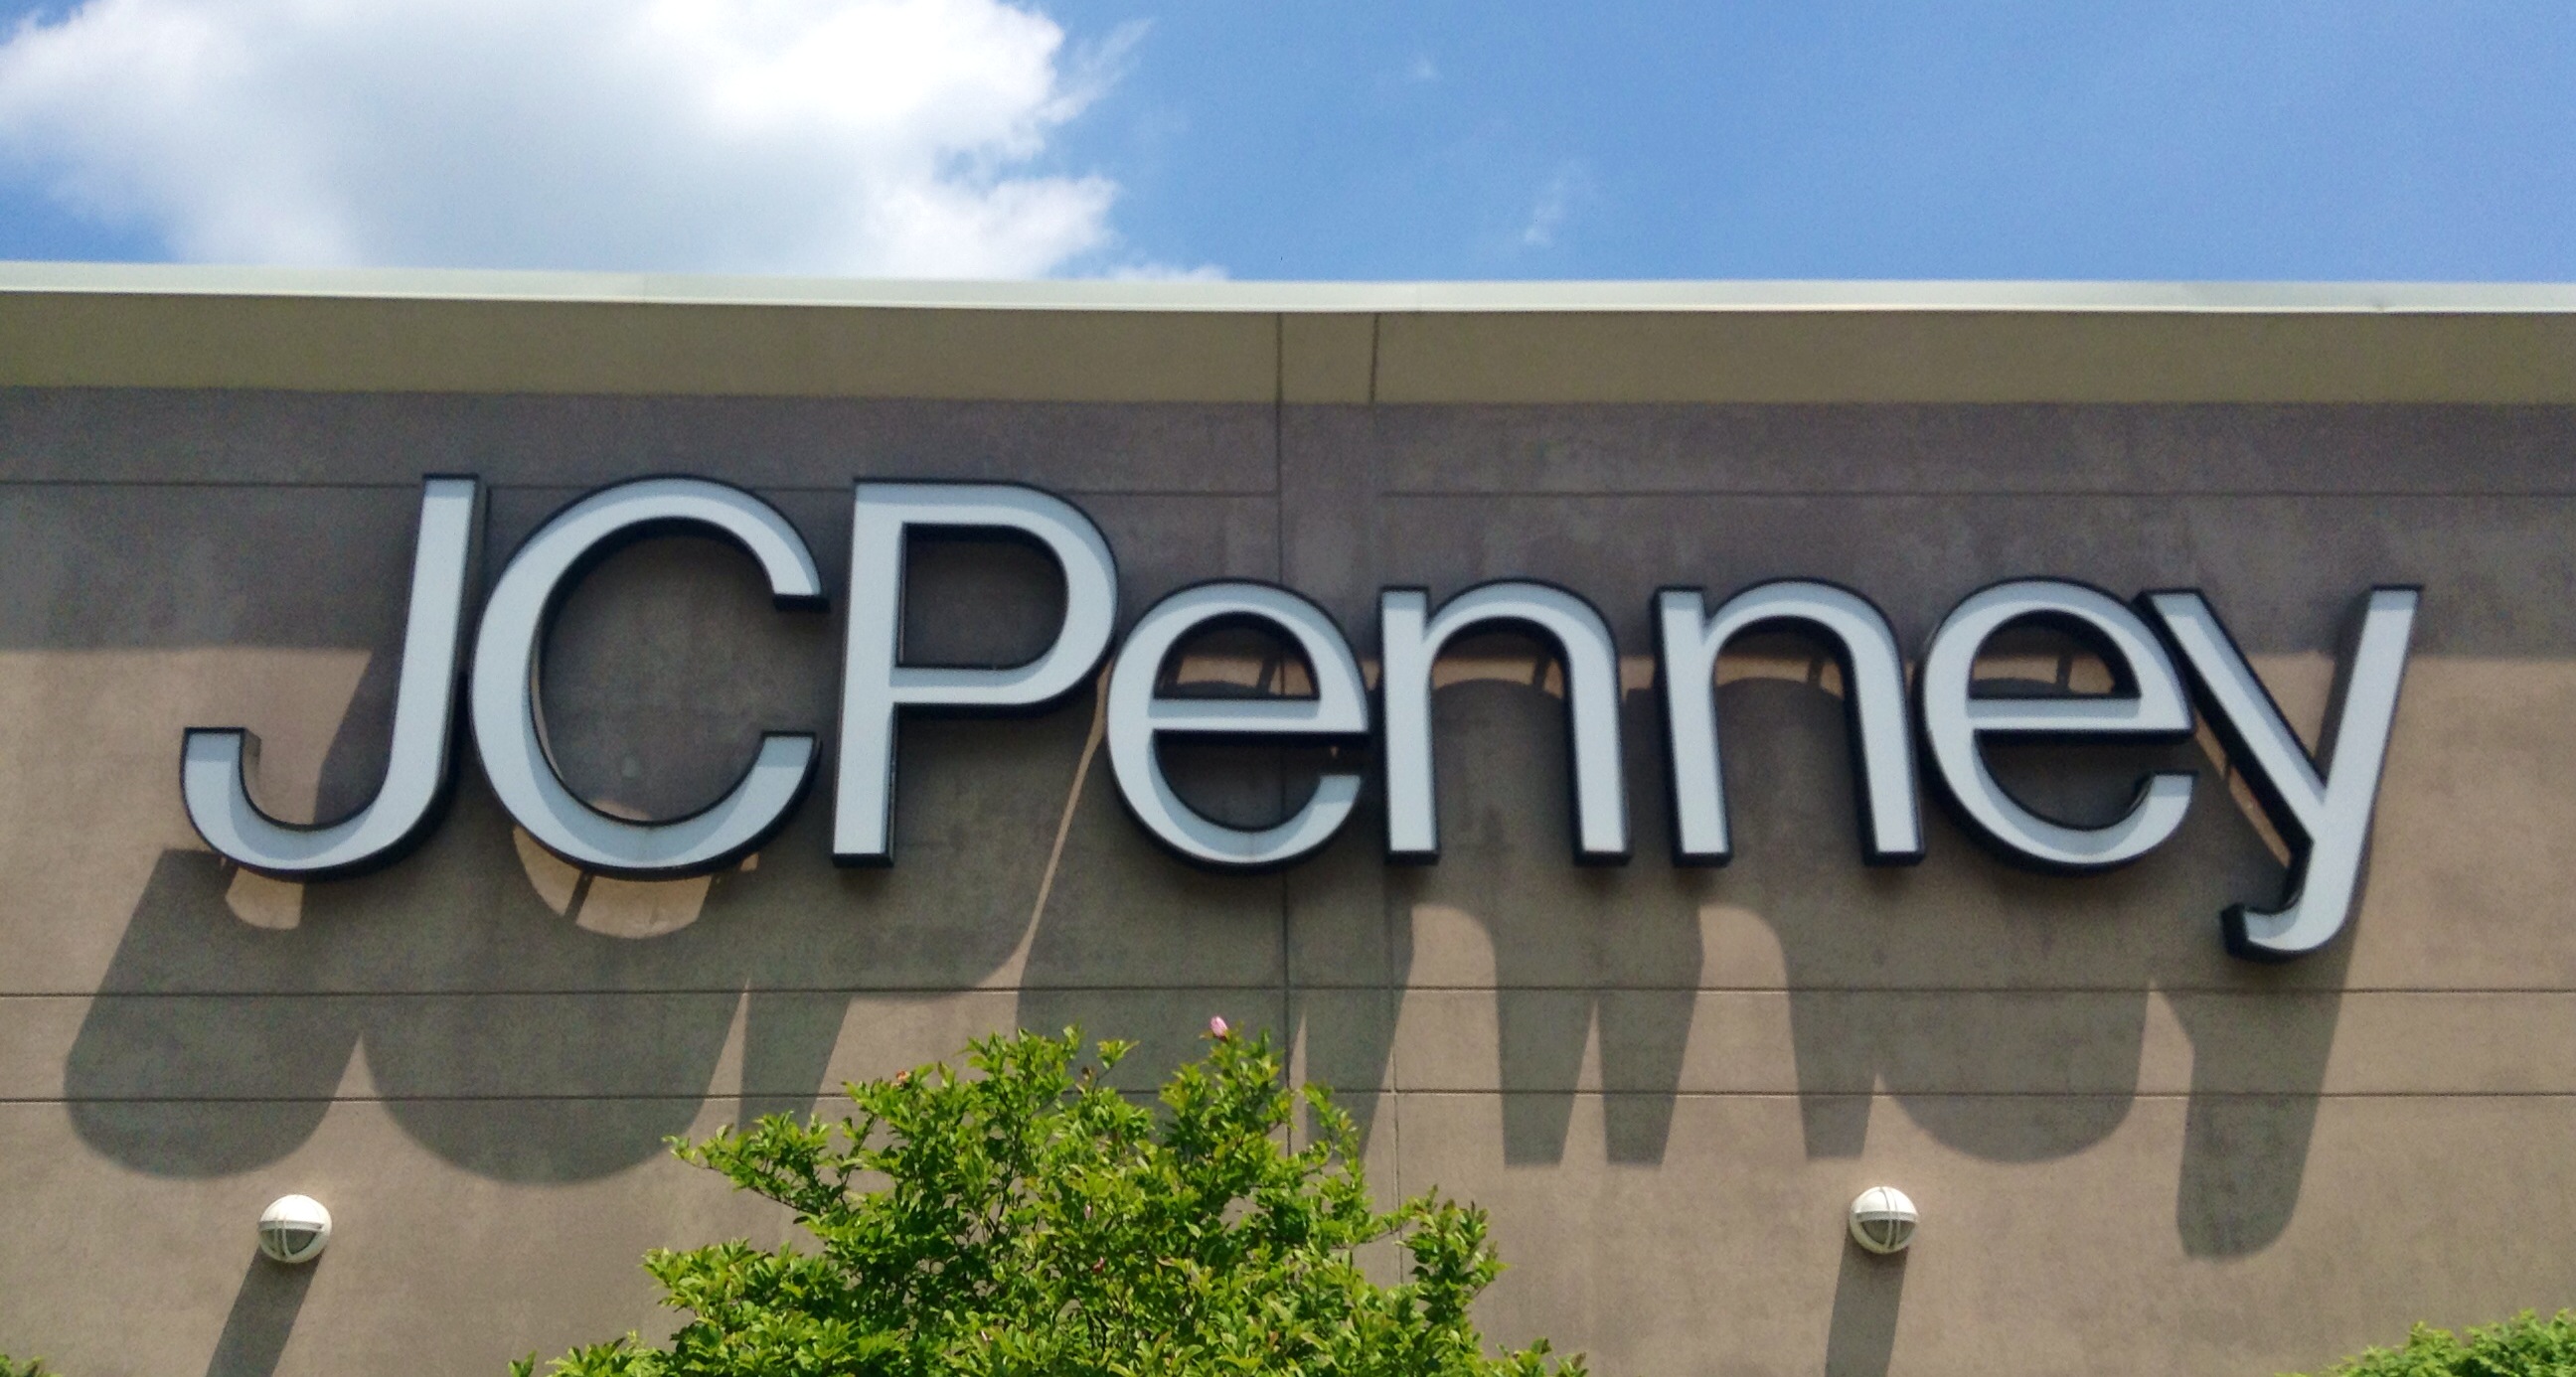 the jcpenney sign on top of a store